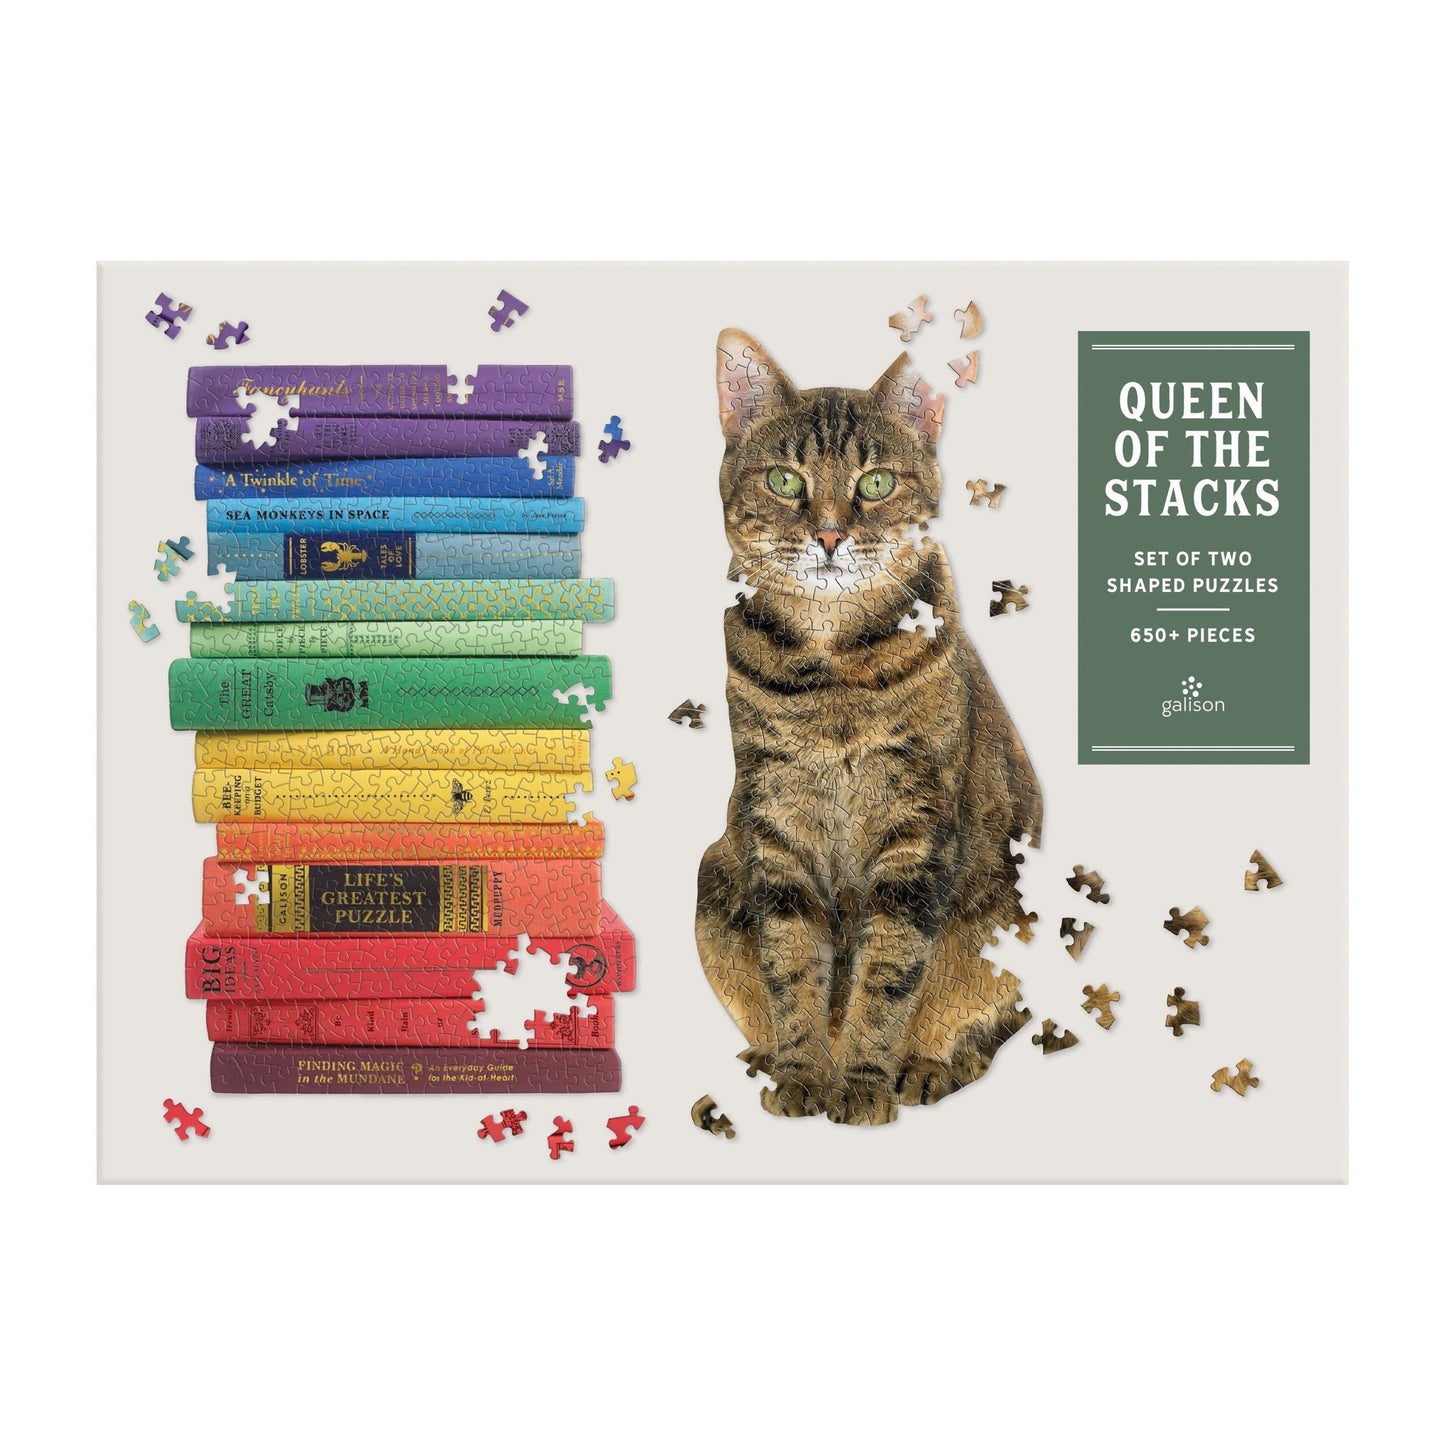 Queen of the Stacks 2 in 1 Shaped Jigsaw Puzzle Set